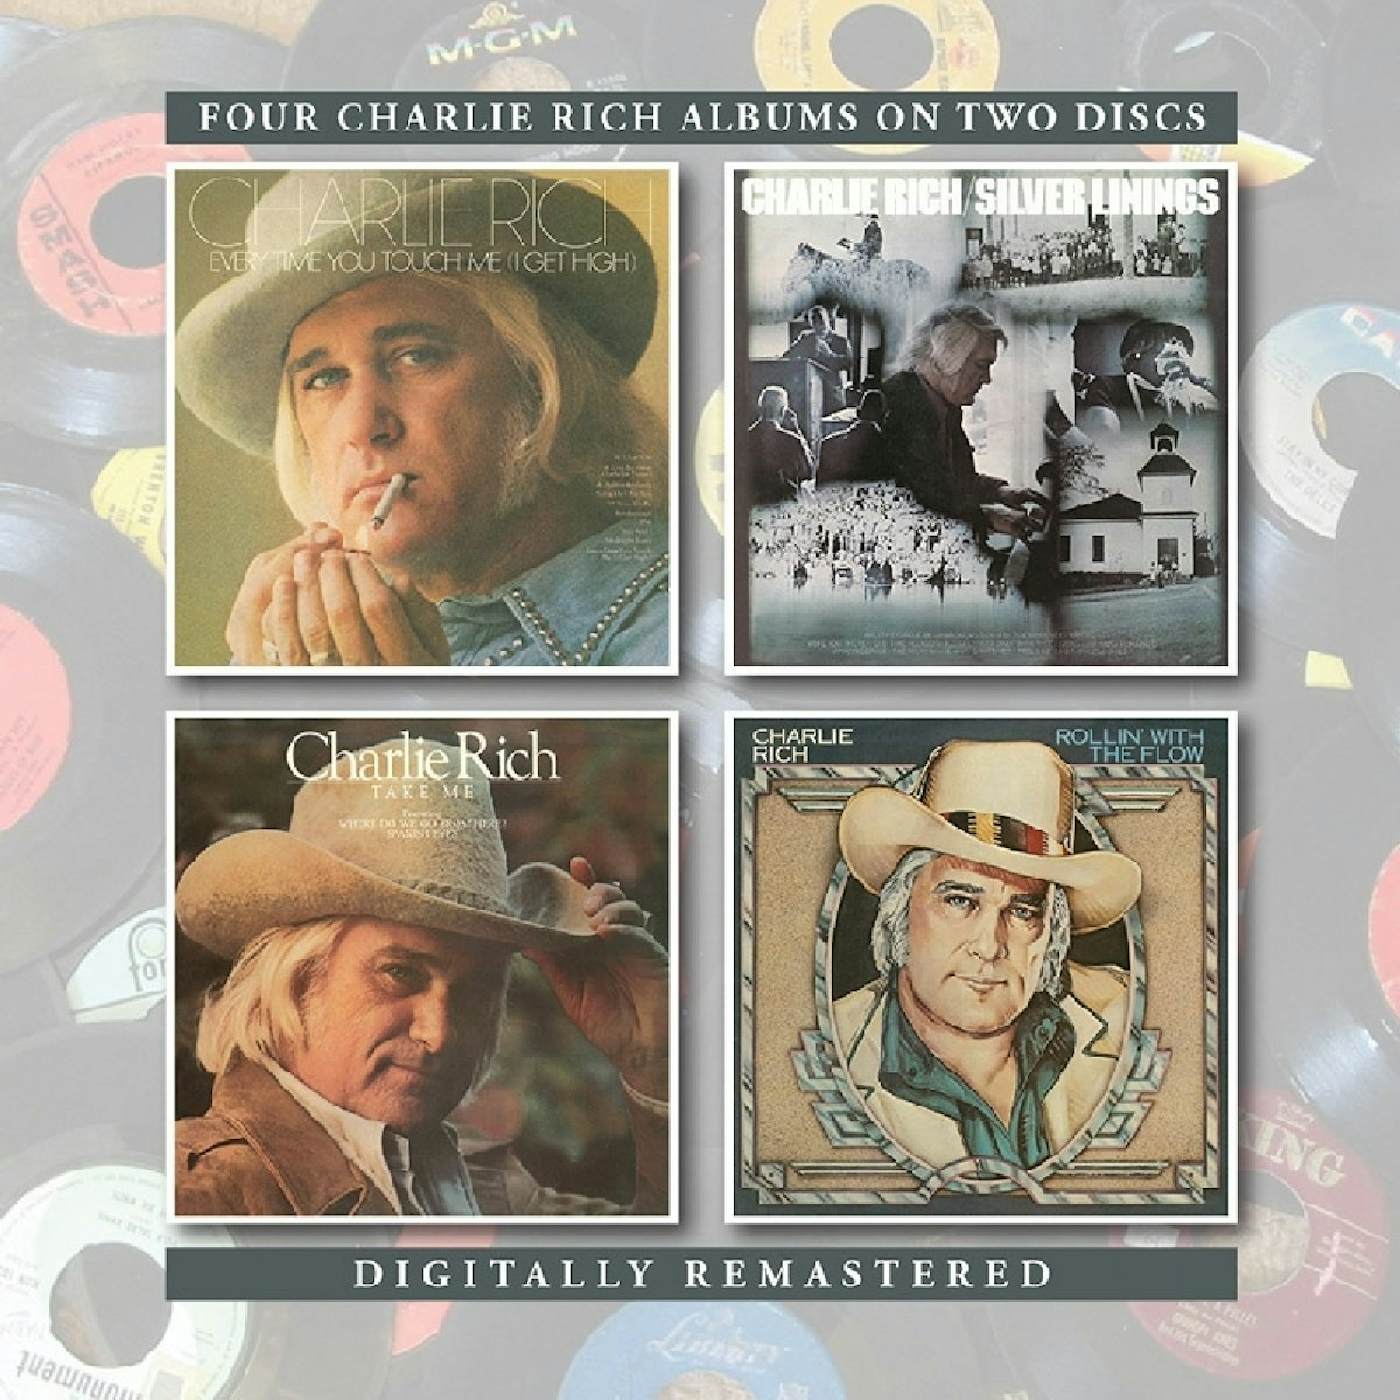 Charlie Rich EVERY TIME YOU TOUCH ME (I GET HIGH) / SILVER CD